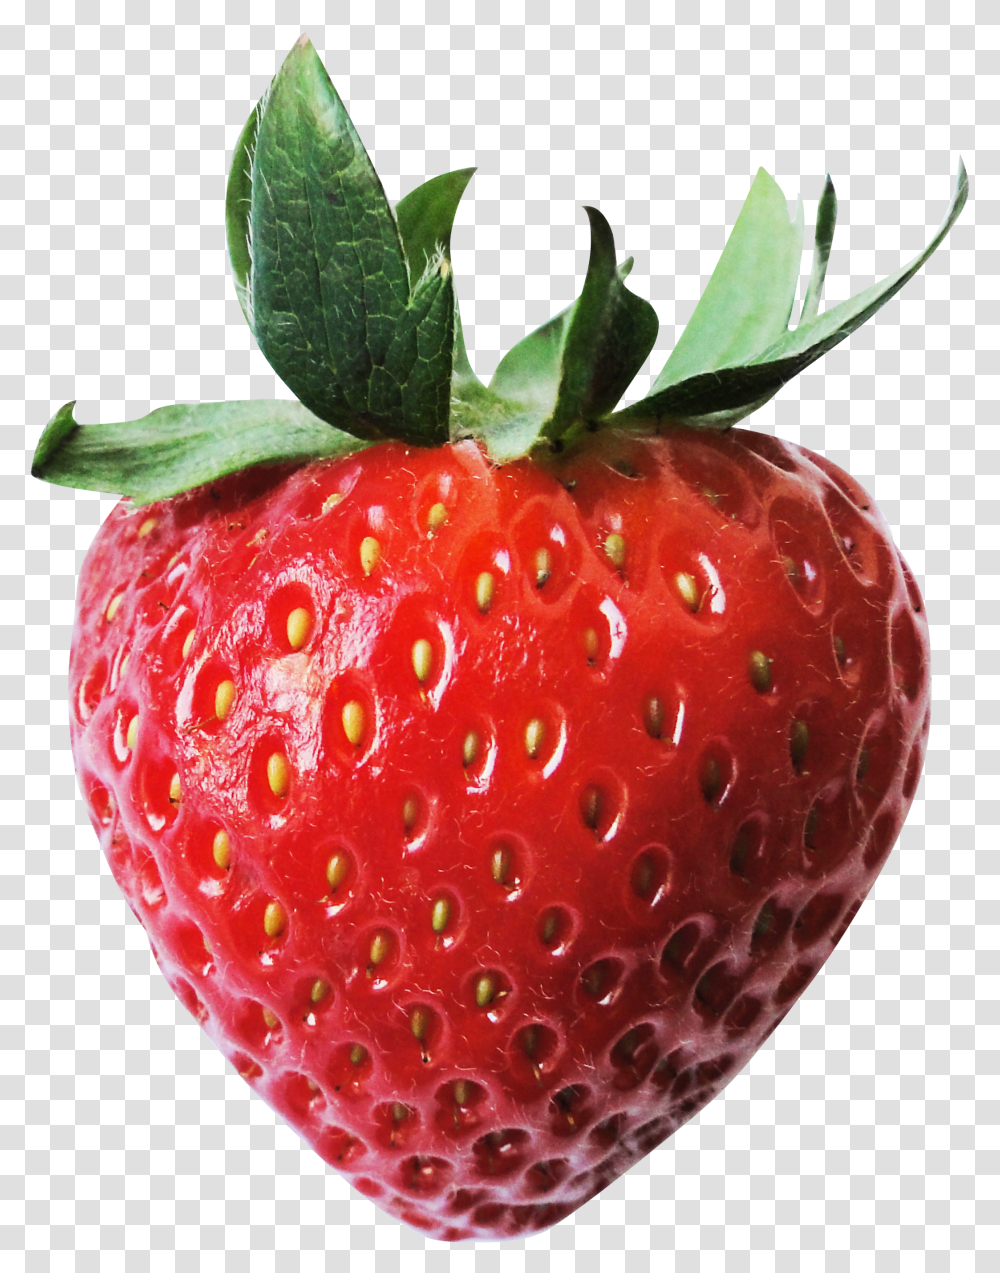 Red Juicy Strawberry Image Some People See Differently Transparent Png